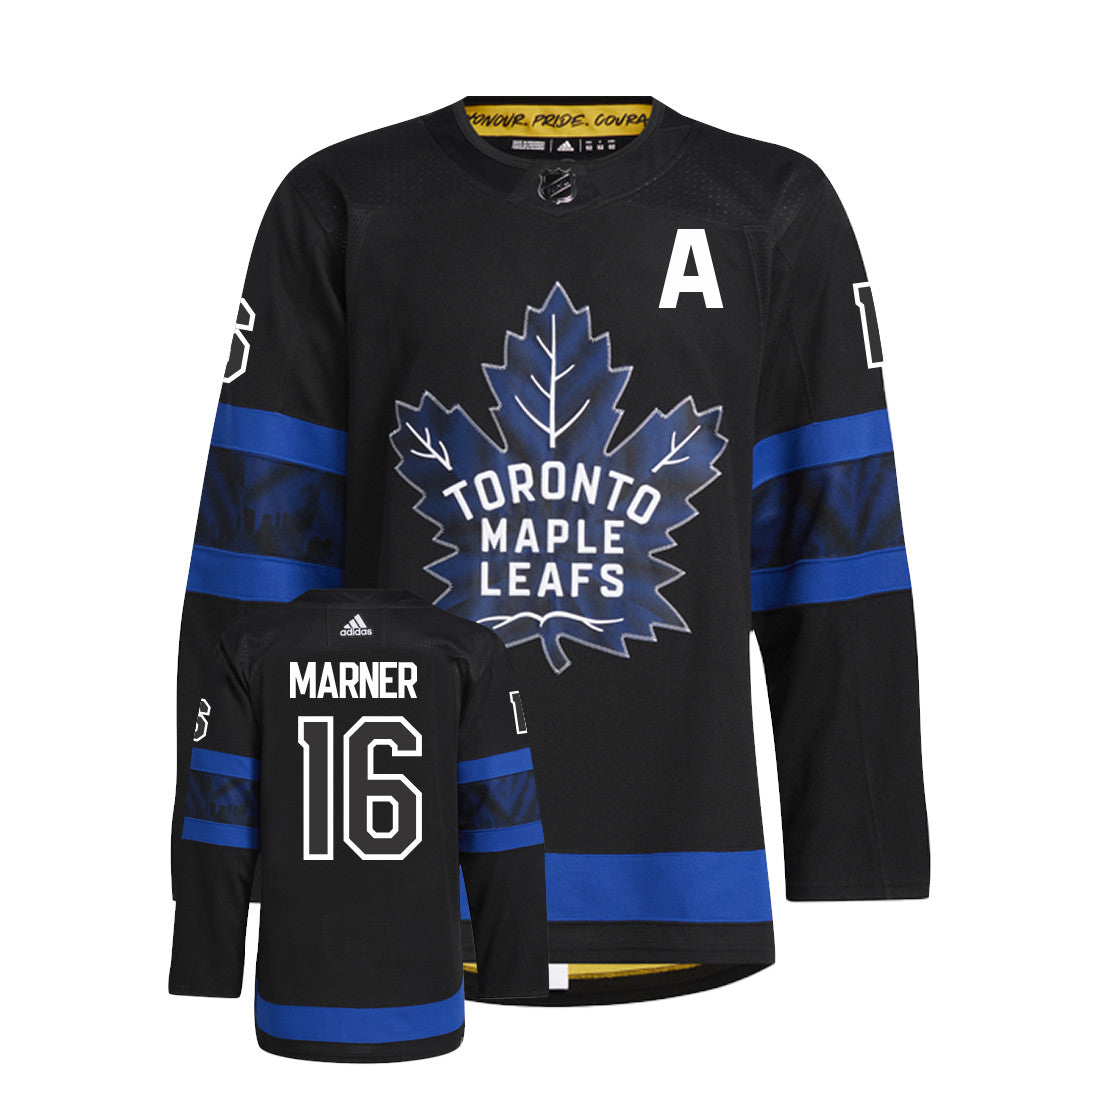 Mitch Marner Toronto Maple Leafs Adidas Primegreen Authentic Third Alternate NHL Hockey Jersey - Front/Back View